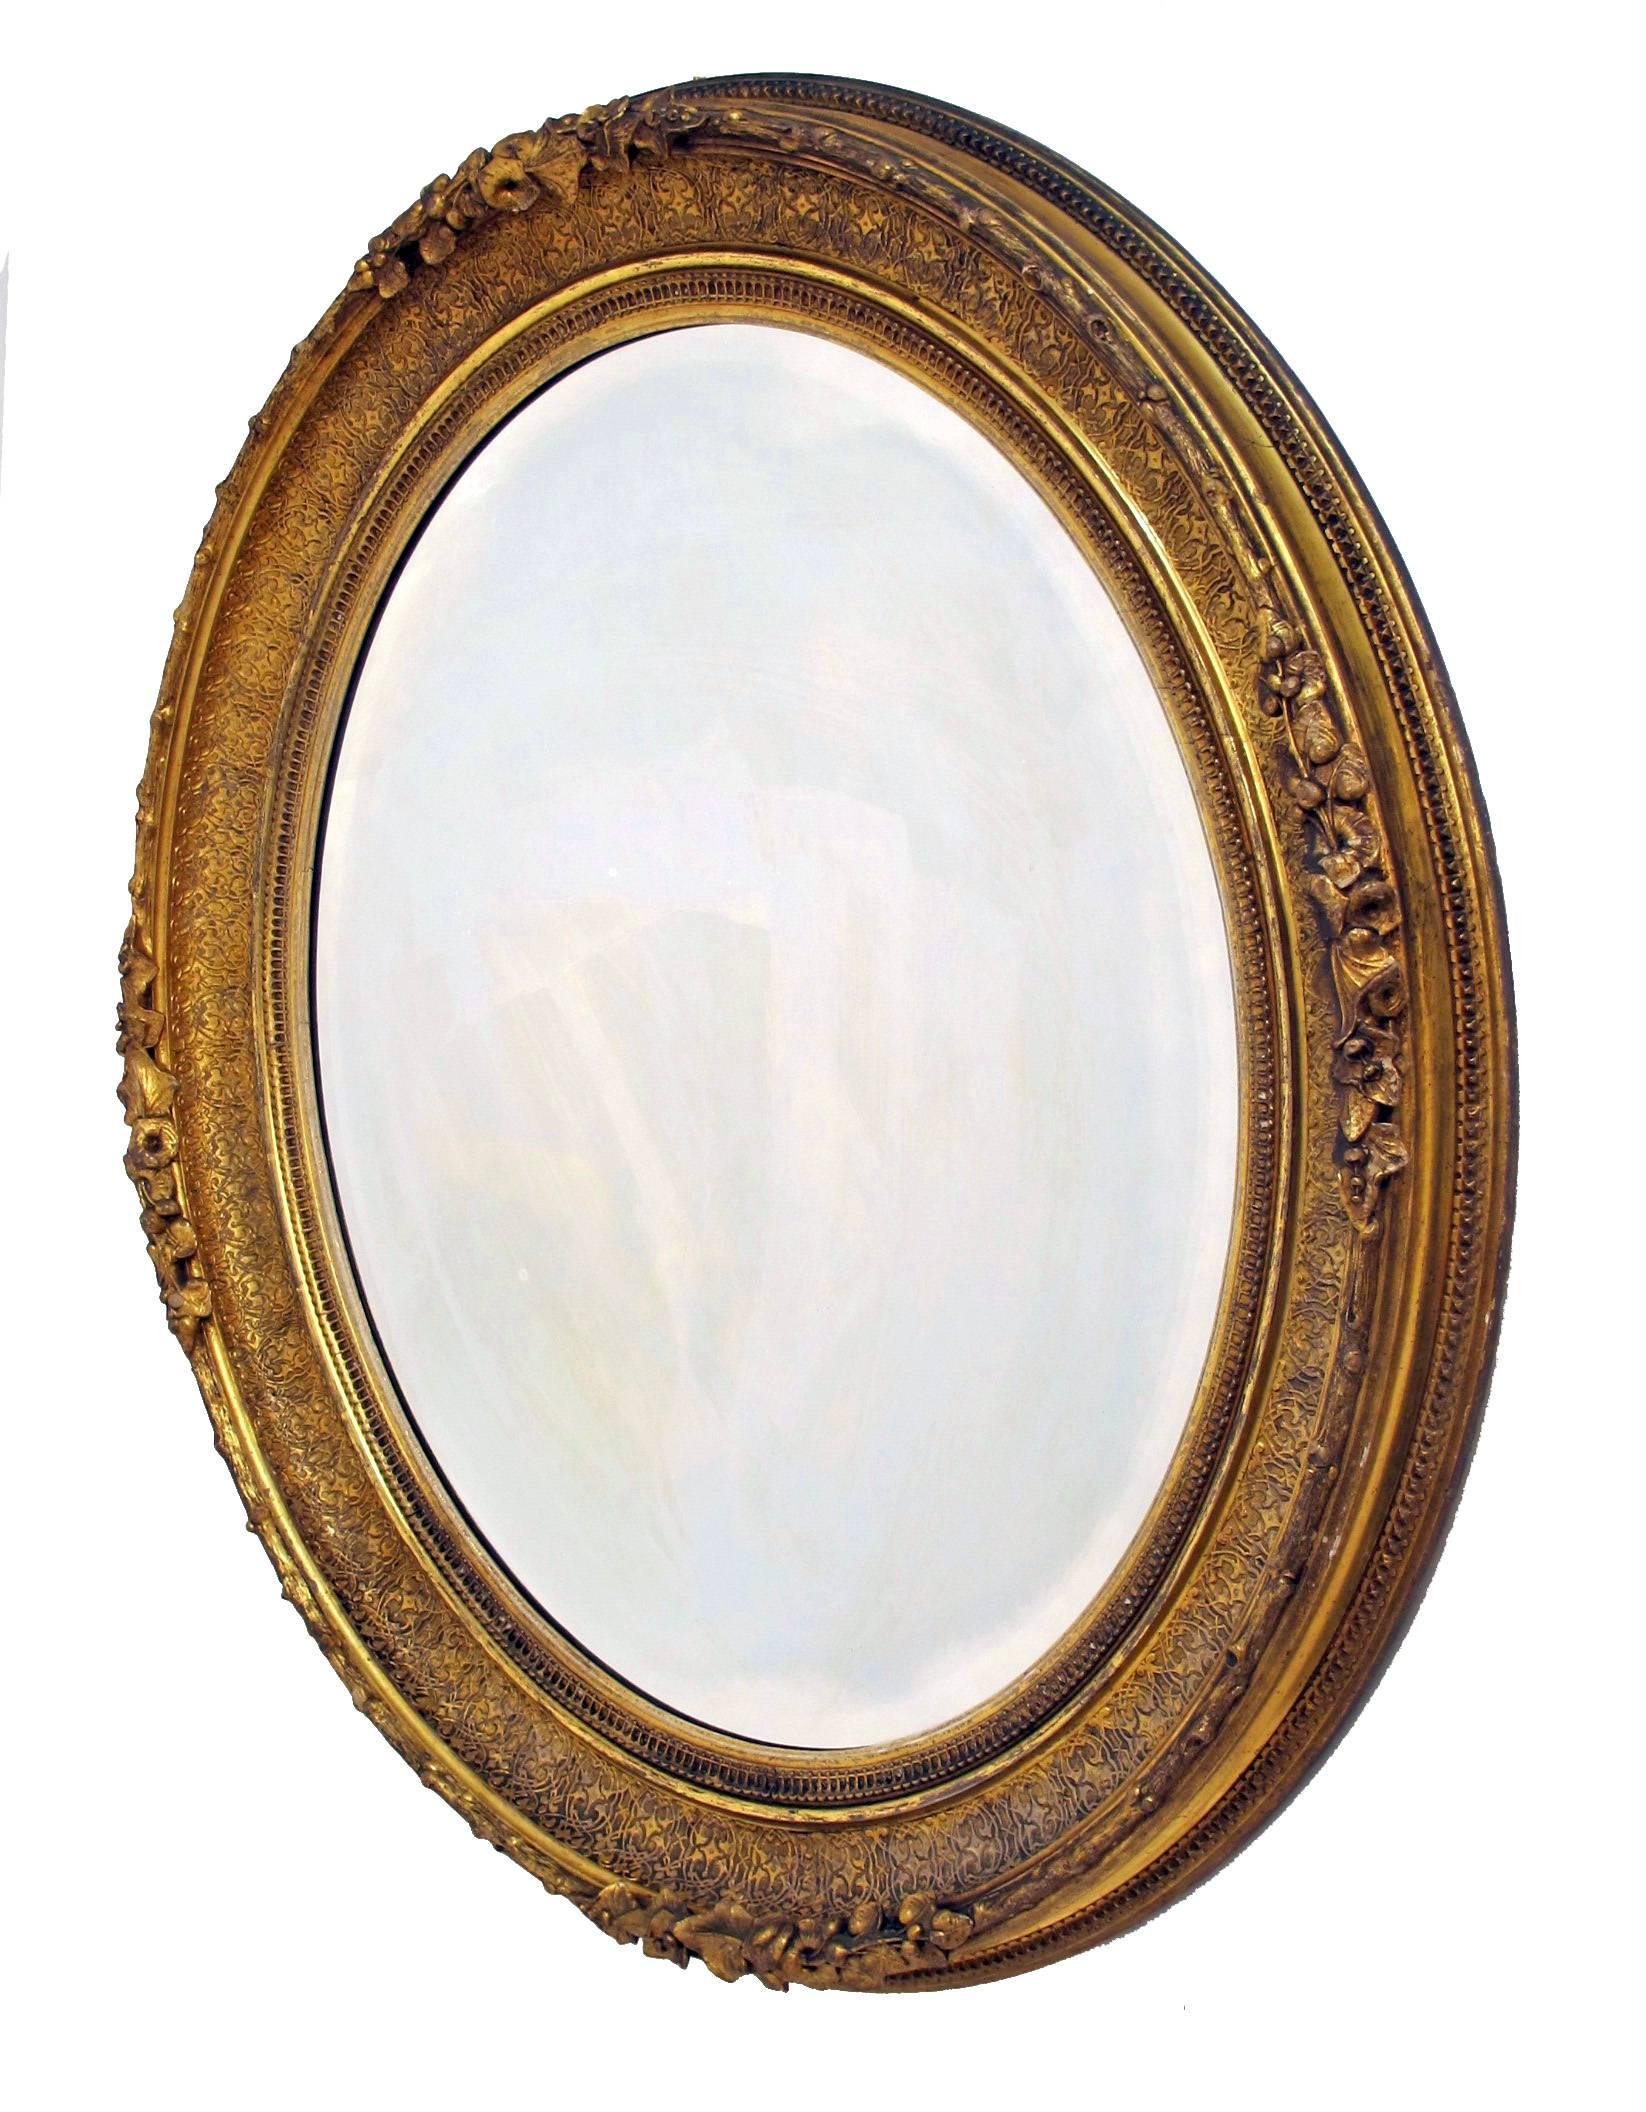 Large oval shape gilt and beveled glass mirror in beautiful original condition, American, 19th century.